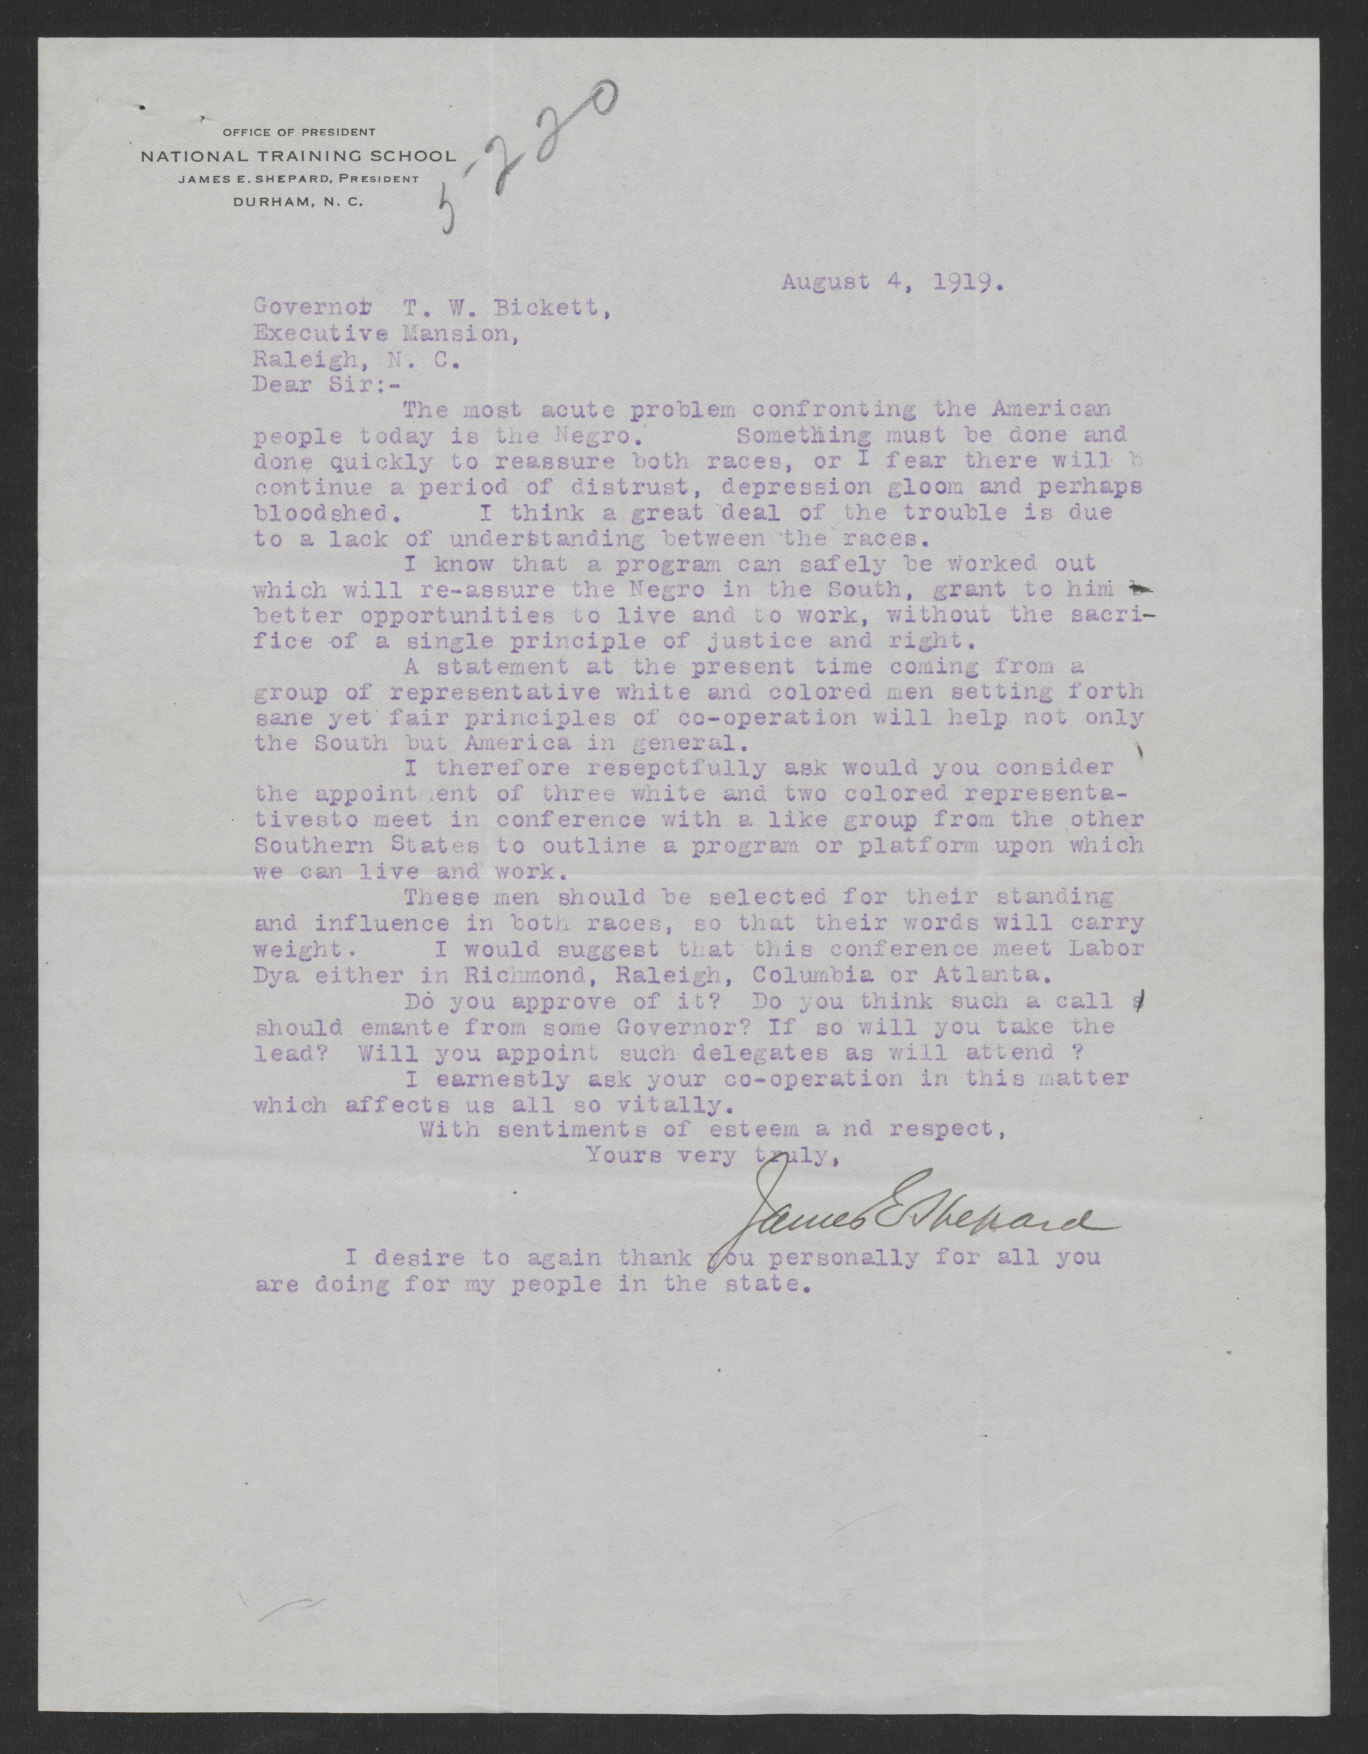 Letter from James E. Shepard to Gov. Thomas W. Bickett, August 4, 1919